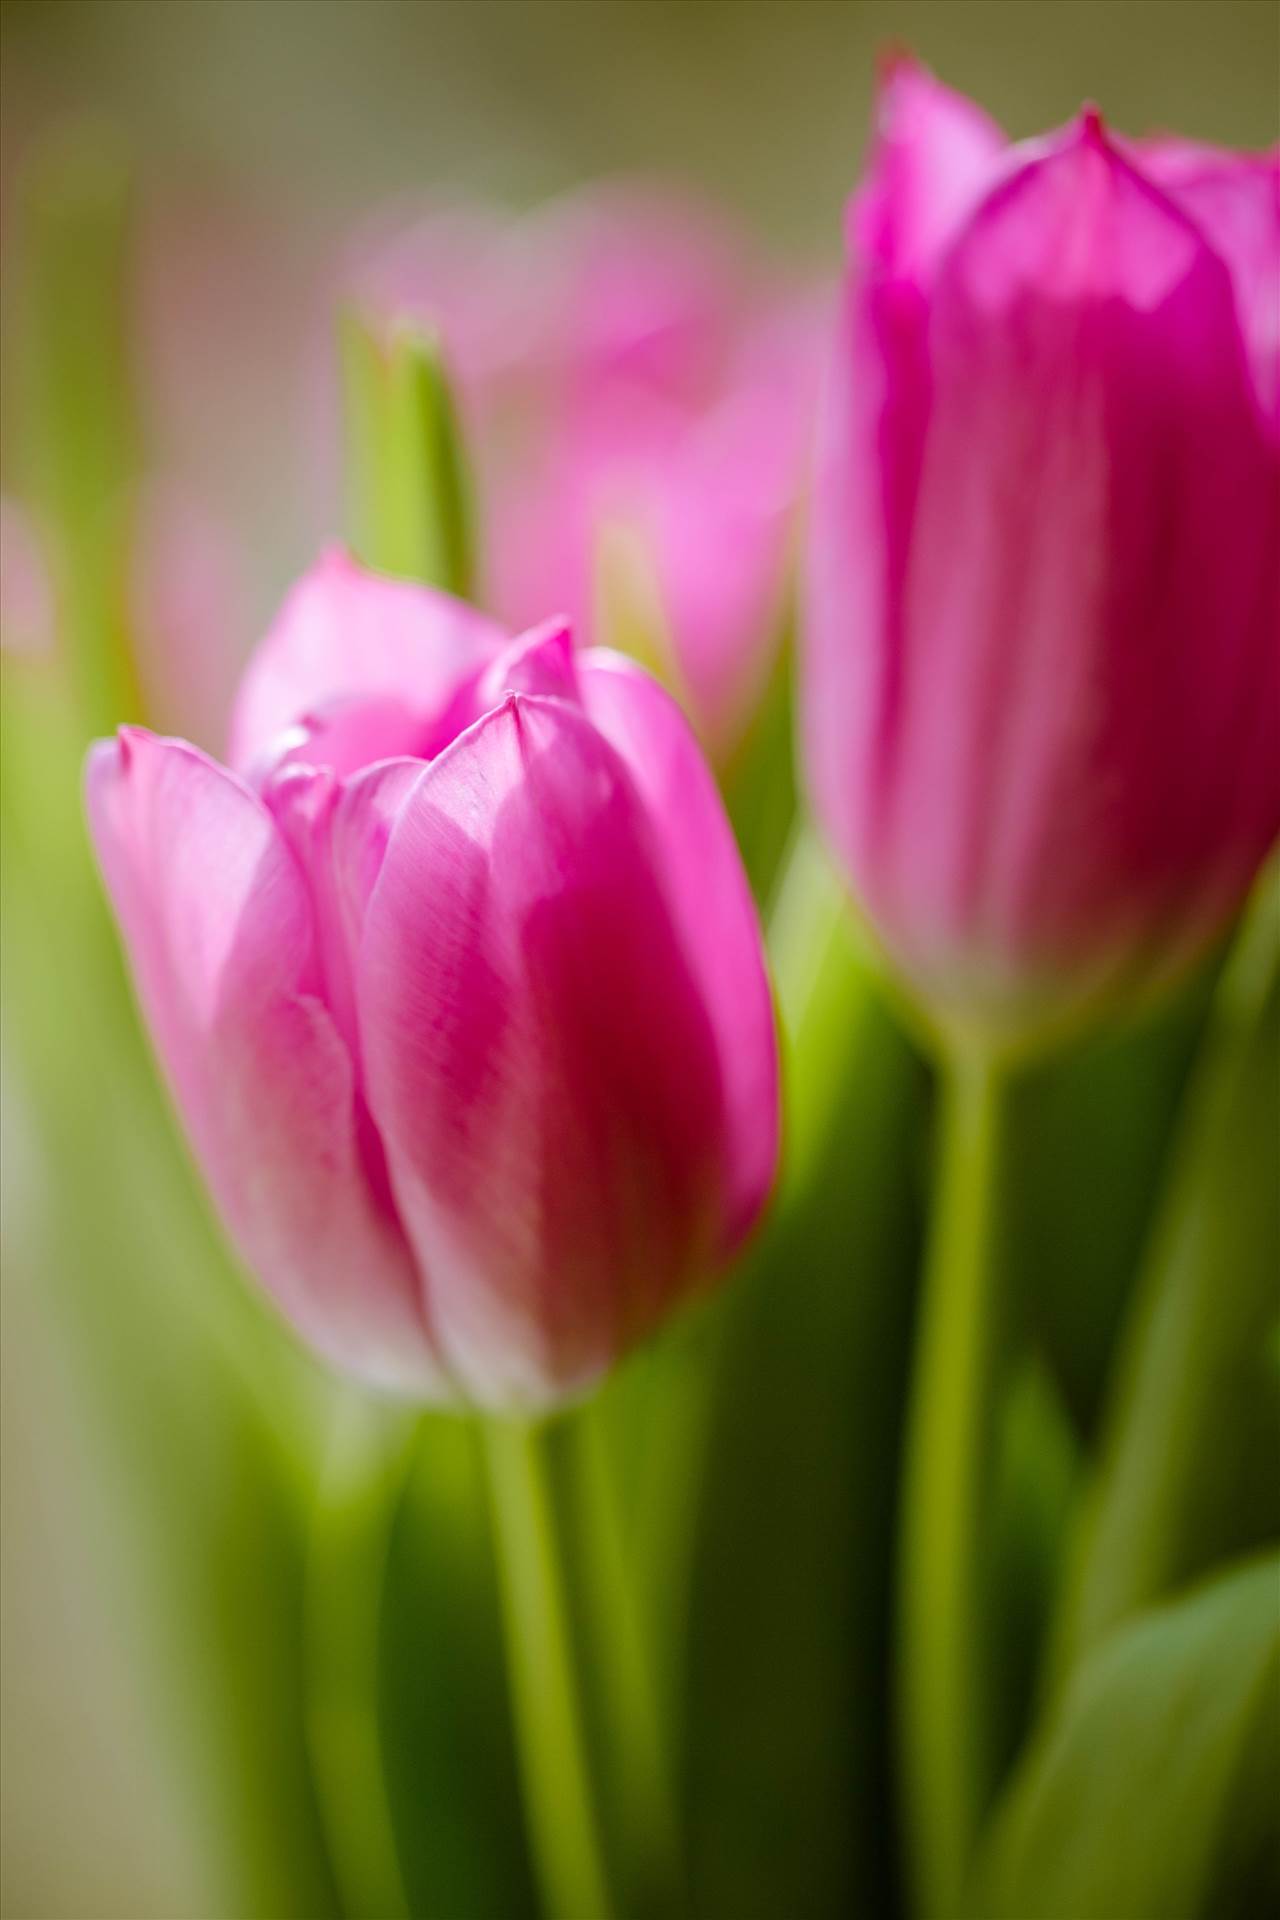 _MG_4549Pink tulips.jpg undefined by WPC-187